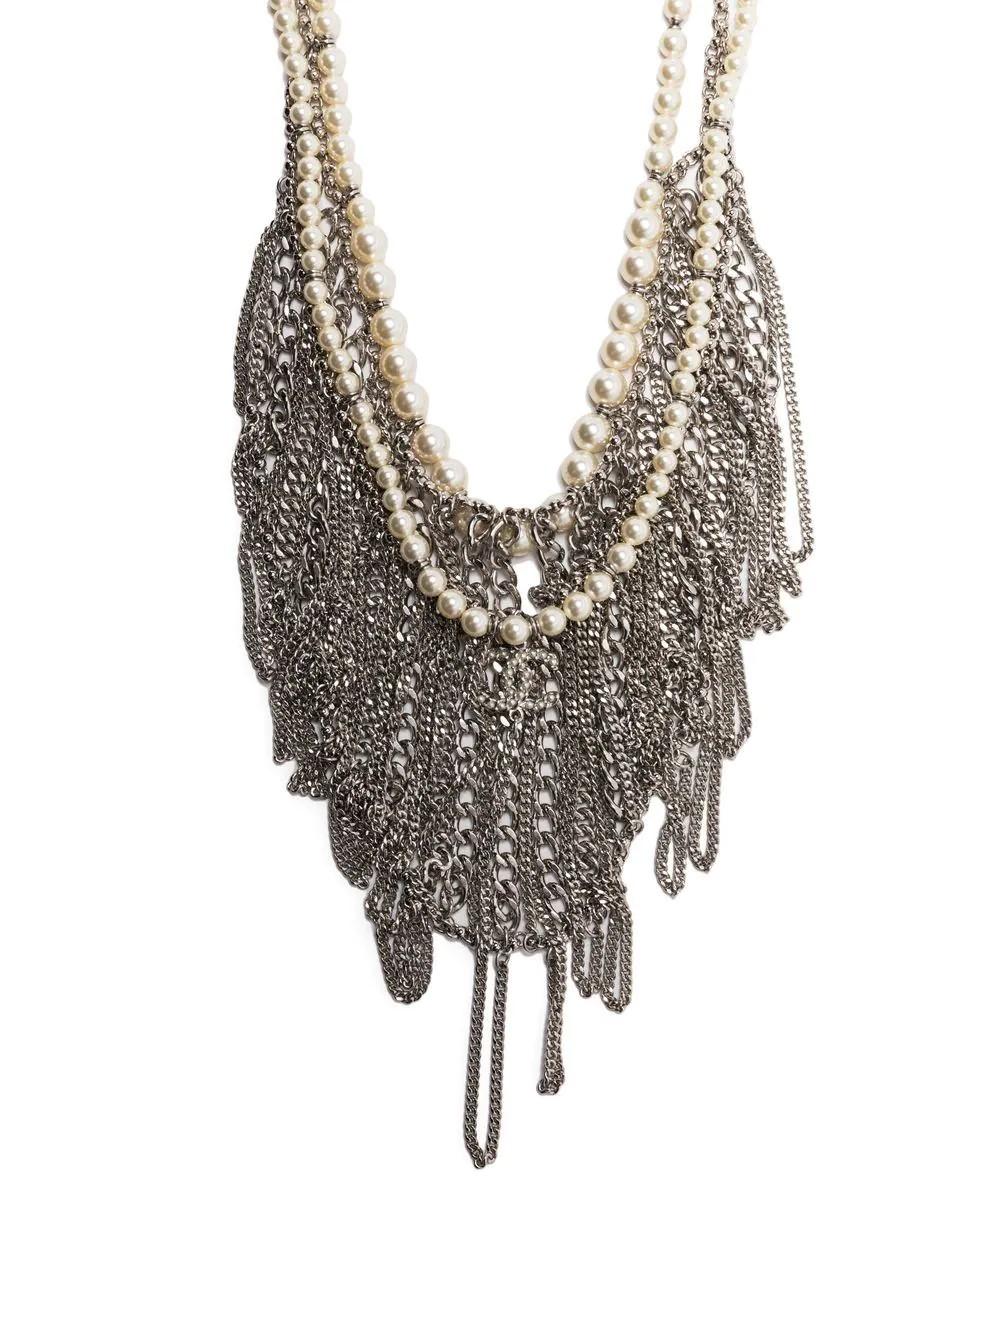 In excellent condition, with a Chanel pouch, this stunning statement necklace is a great find. Coming from the 2015 collection, this necklace has a double-layered silver chain and faux pearl embellishment. The iconic double CC can also be seen